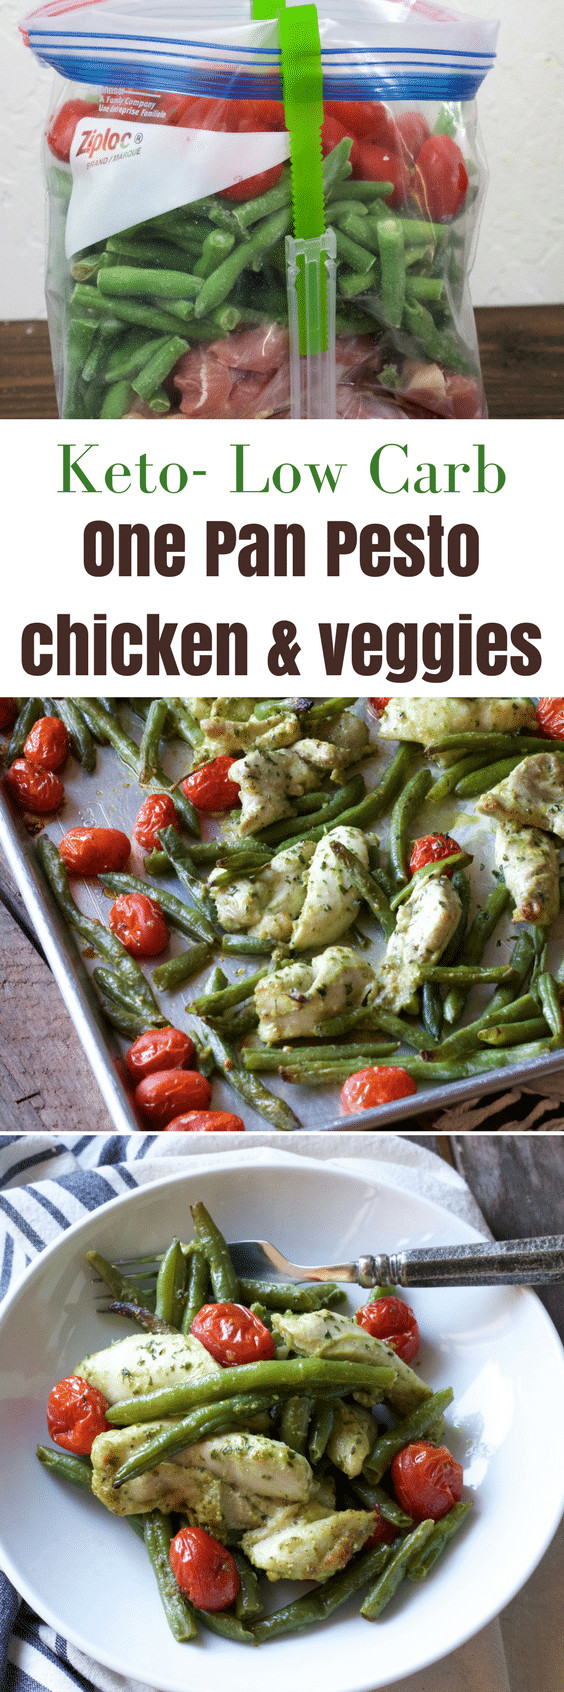 Super Clean Keto
 Keto Low Carb ONE PAN Chicken Pesto Dinner So simple and